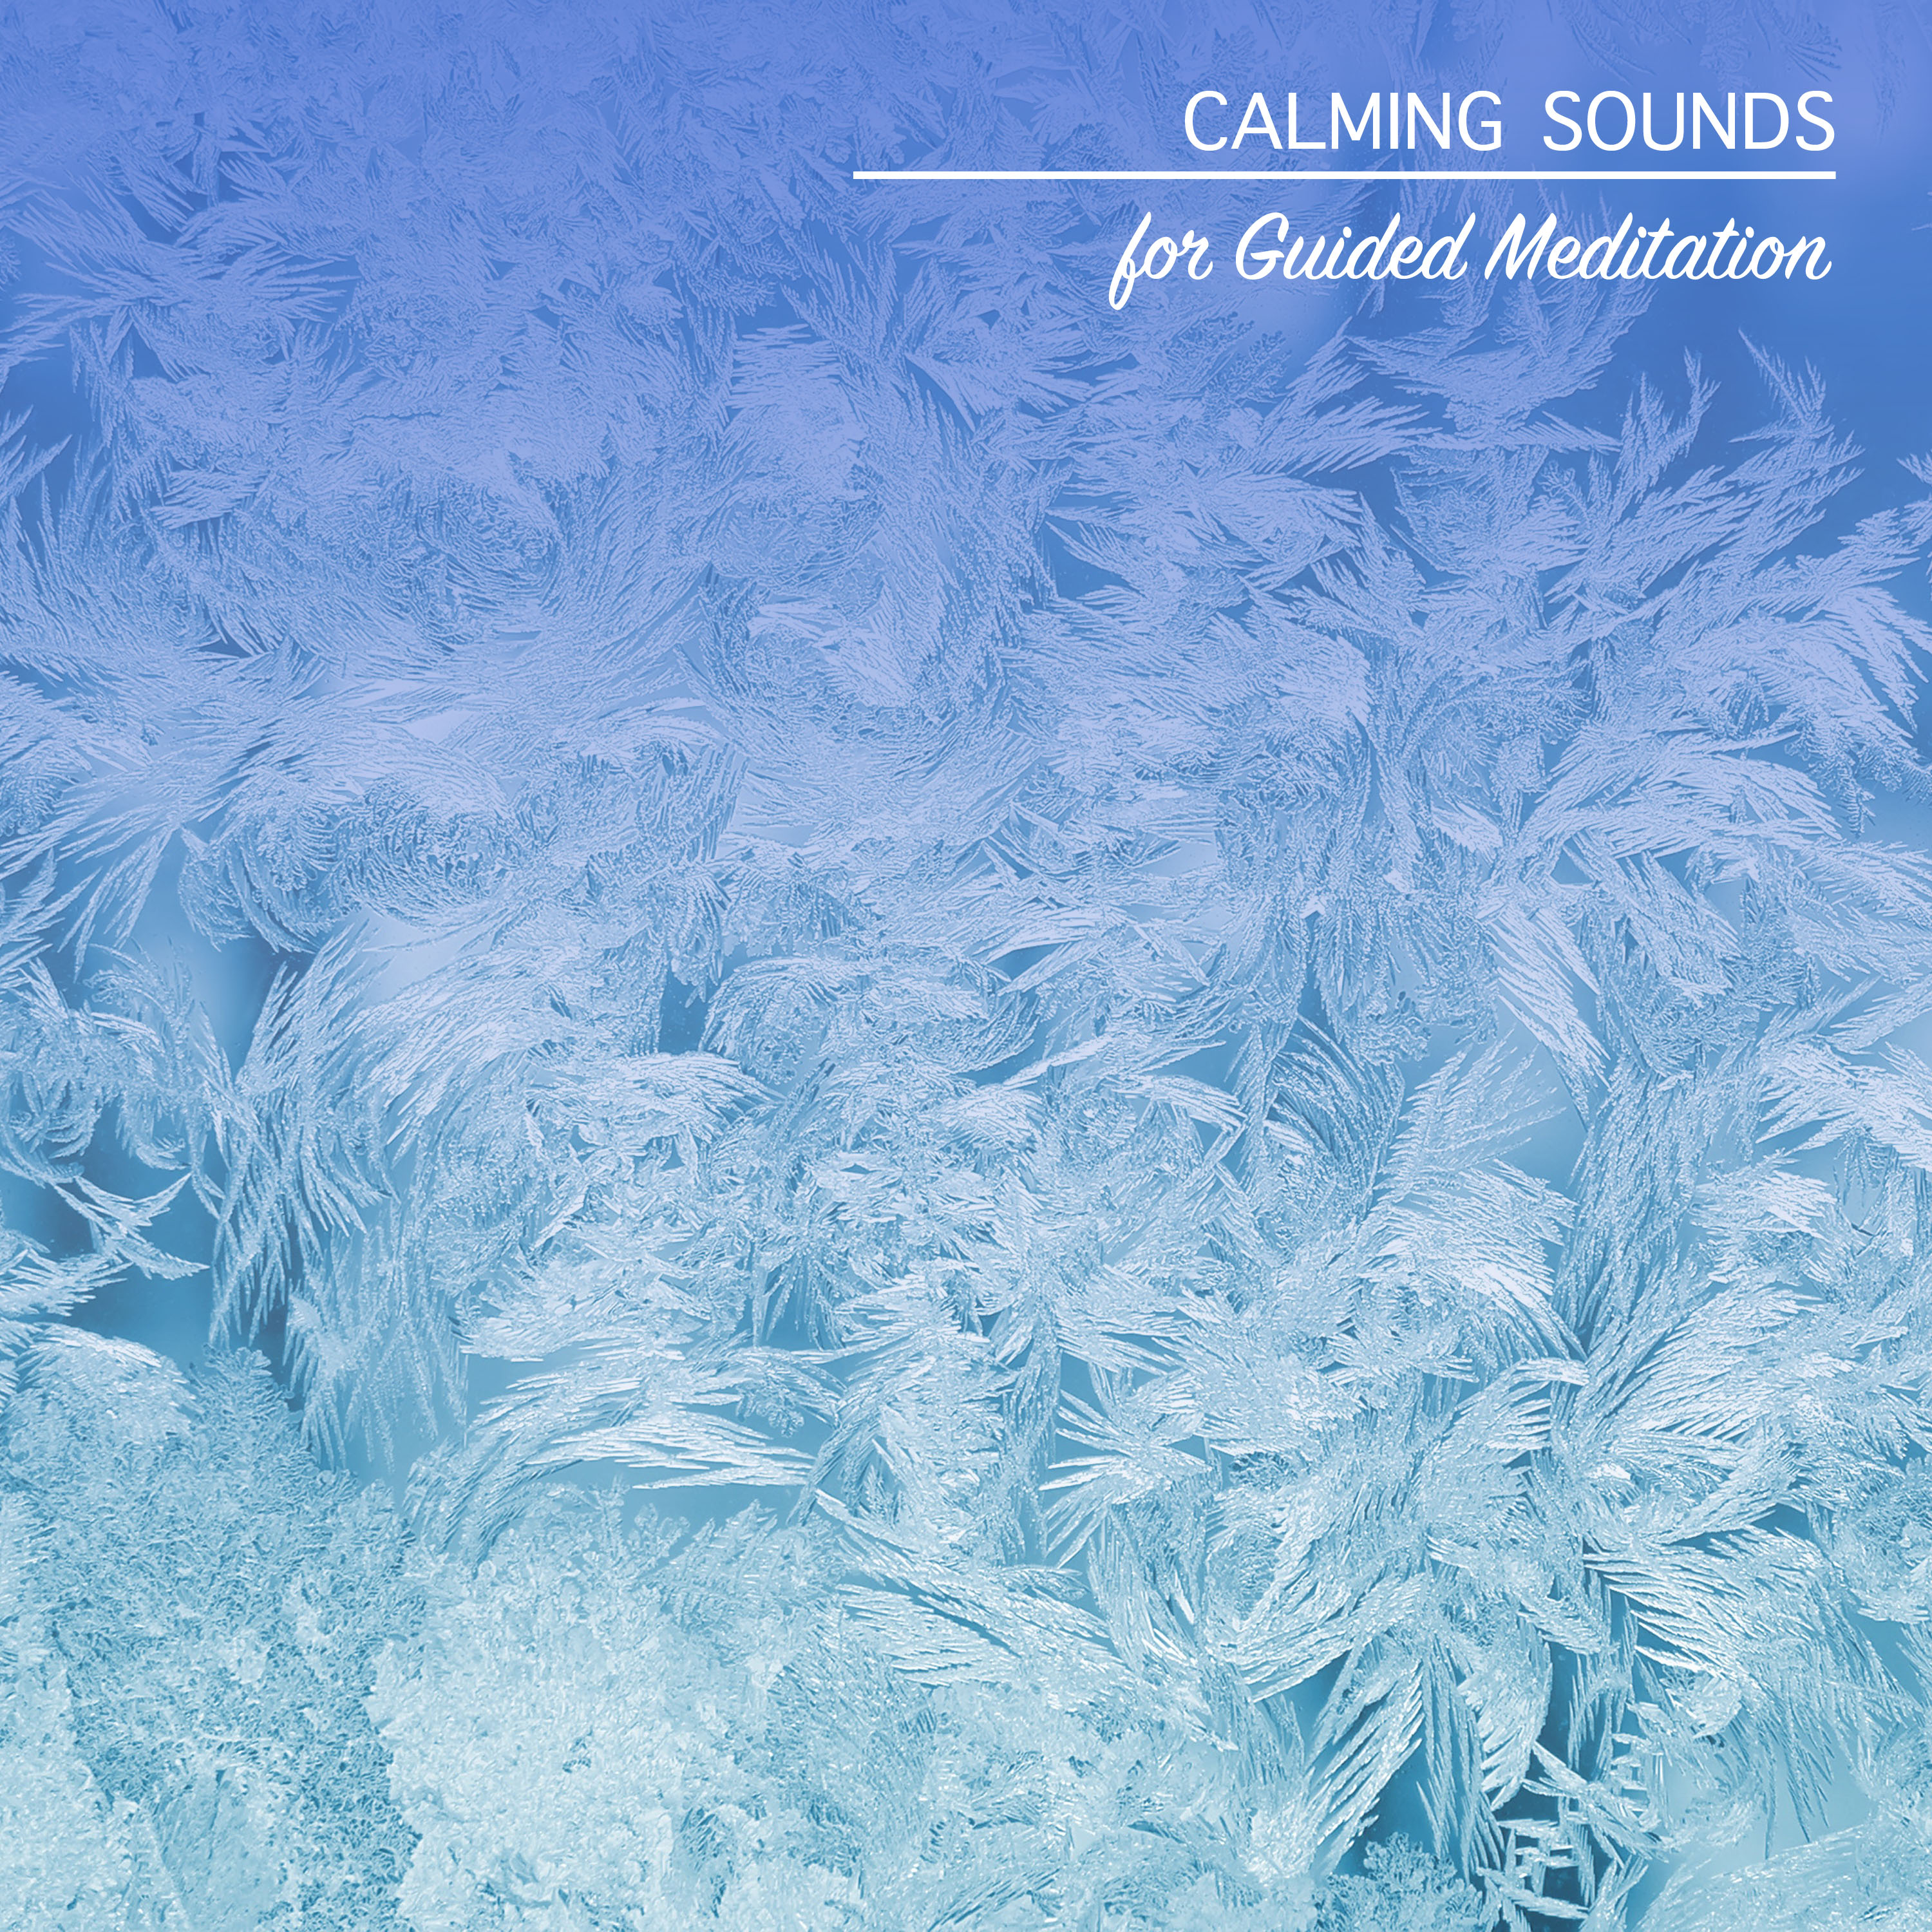 21 Naturally Calming Sounds for Guided Meditation